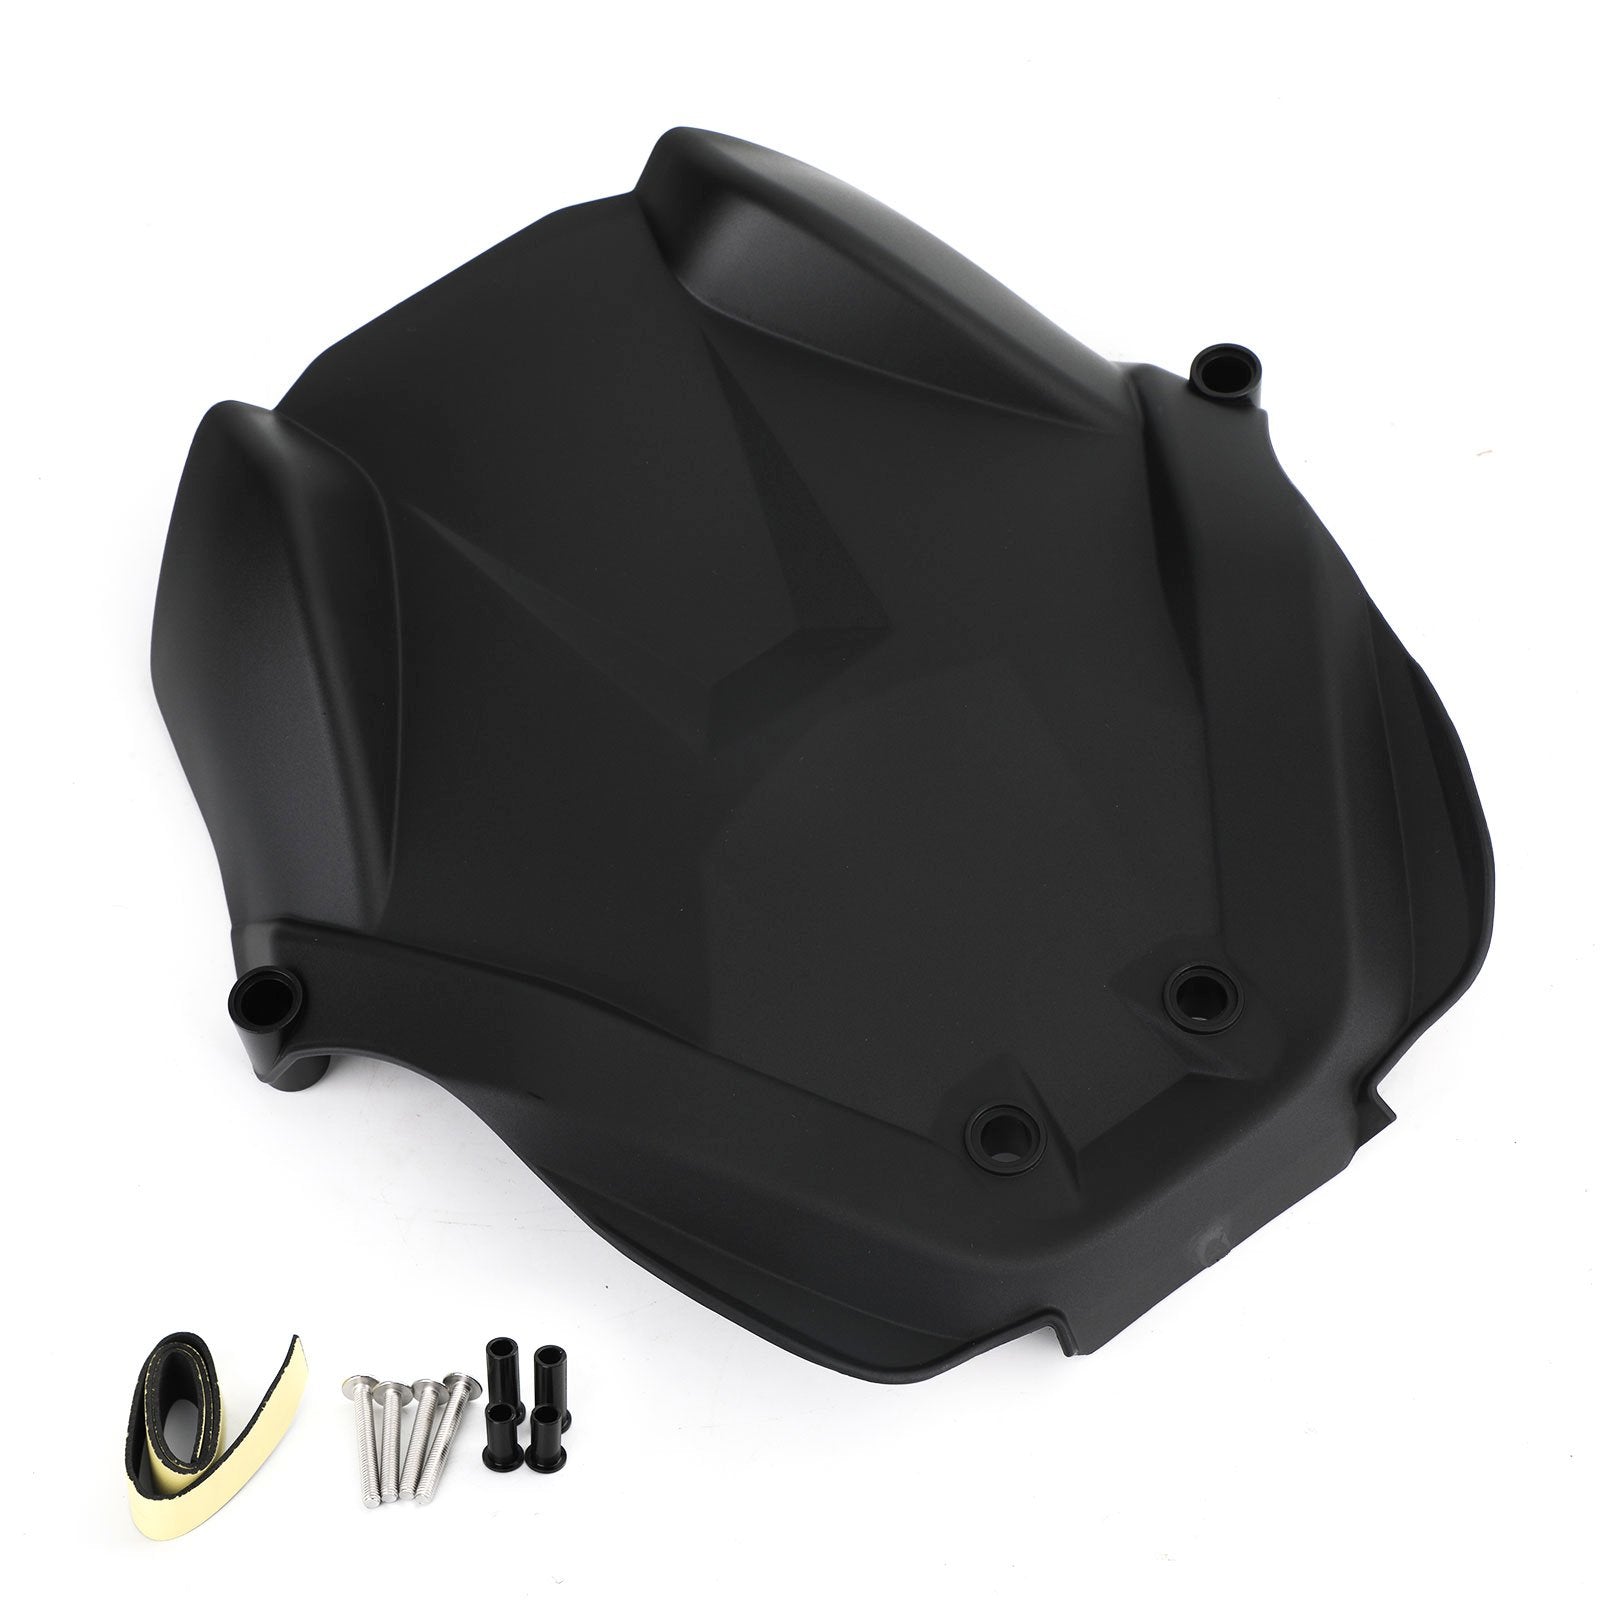 BMW Front Engine Cover Guard Fit For BMW  R1200RT LC Adv 14-18 R1200GS LC 13-18 R1250RT R1250RS R1250R 2019-2020 Black